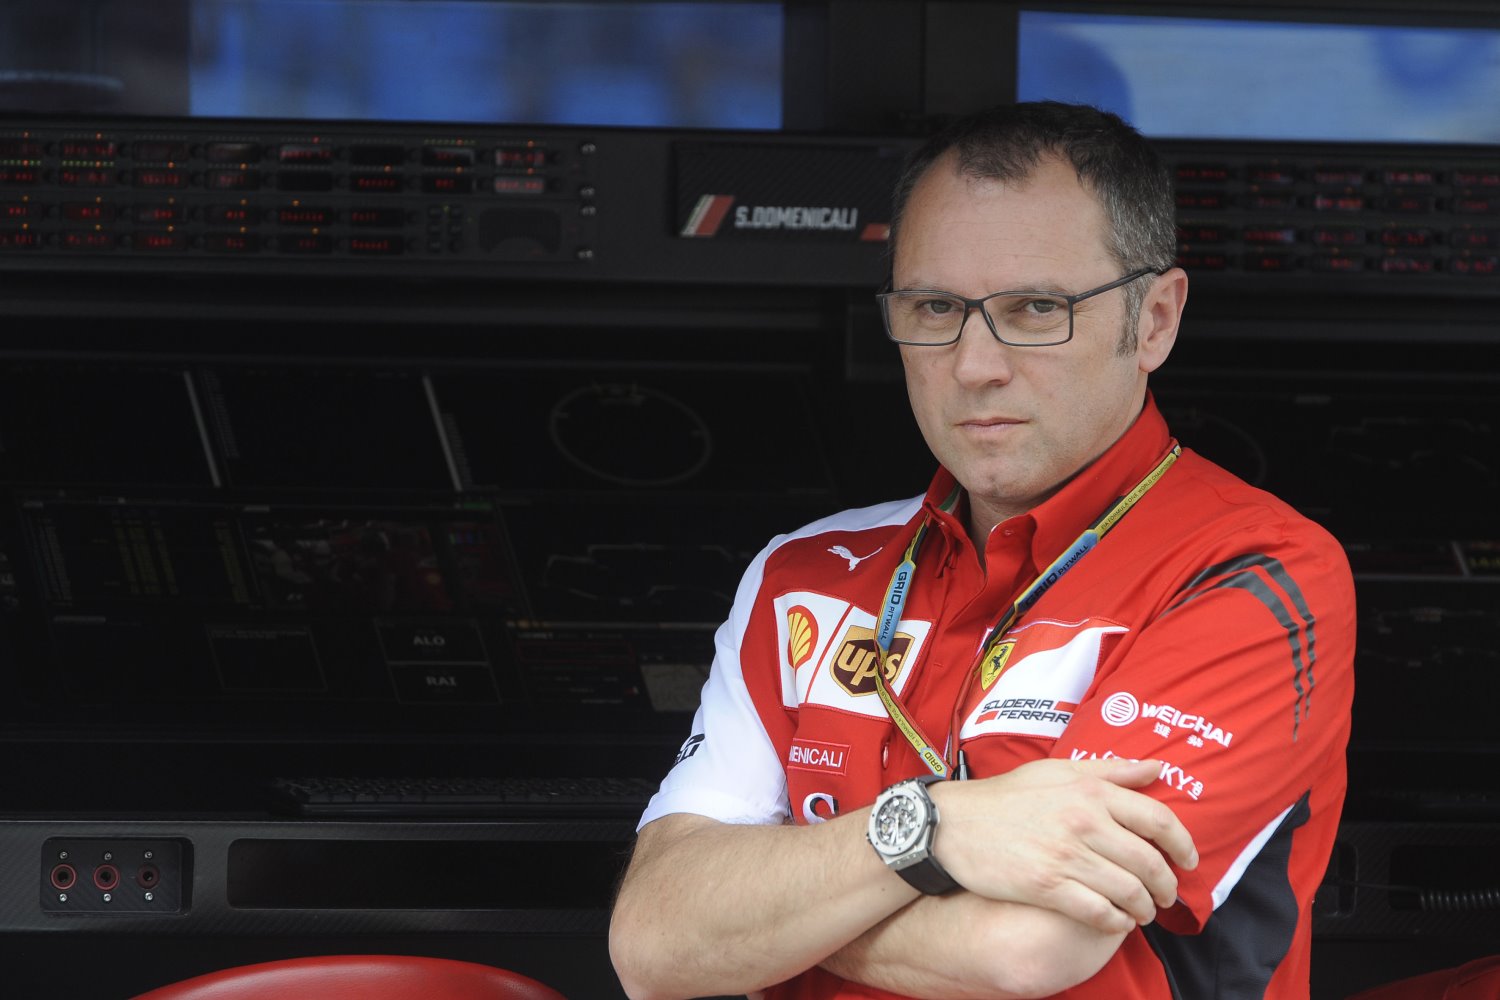 Former Ferrari boss Stefano Domenicali on the outside looking in at Ferrari team doing what he could not